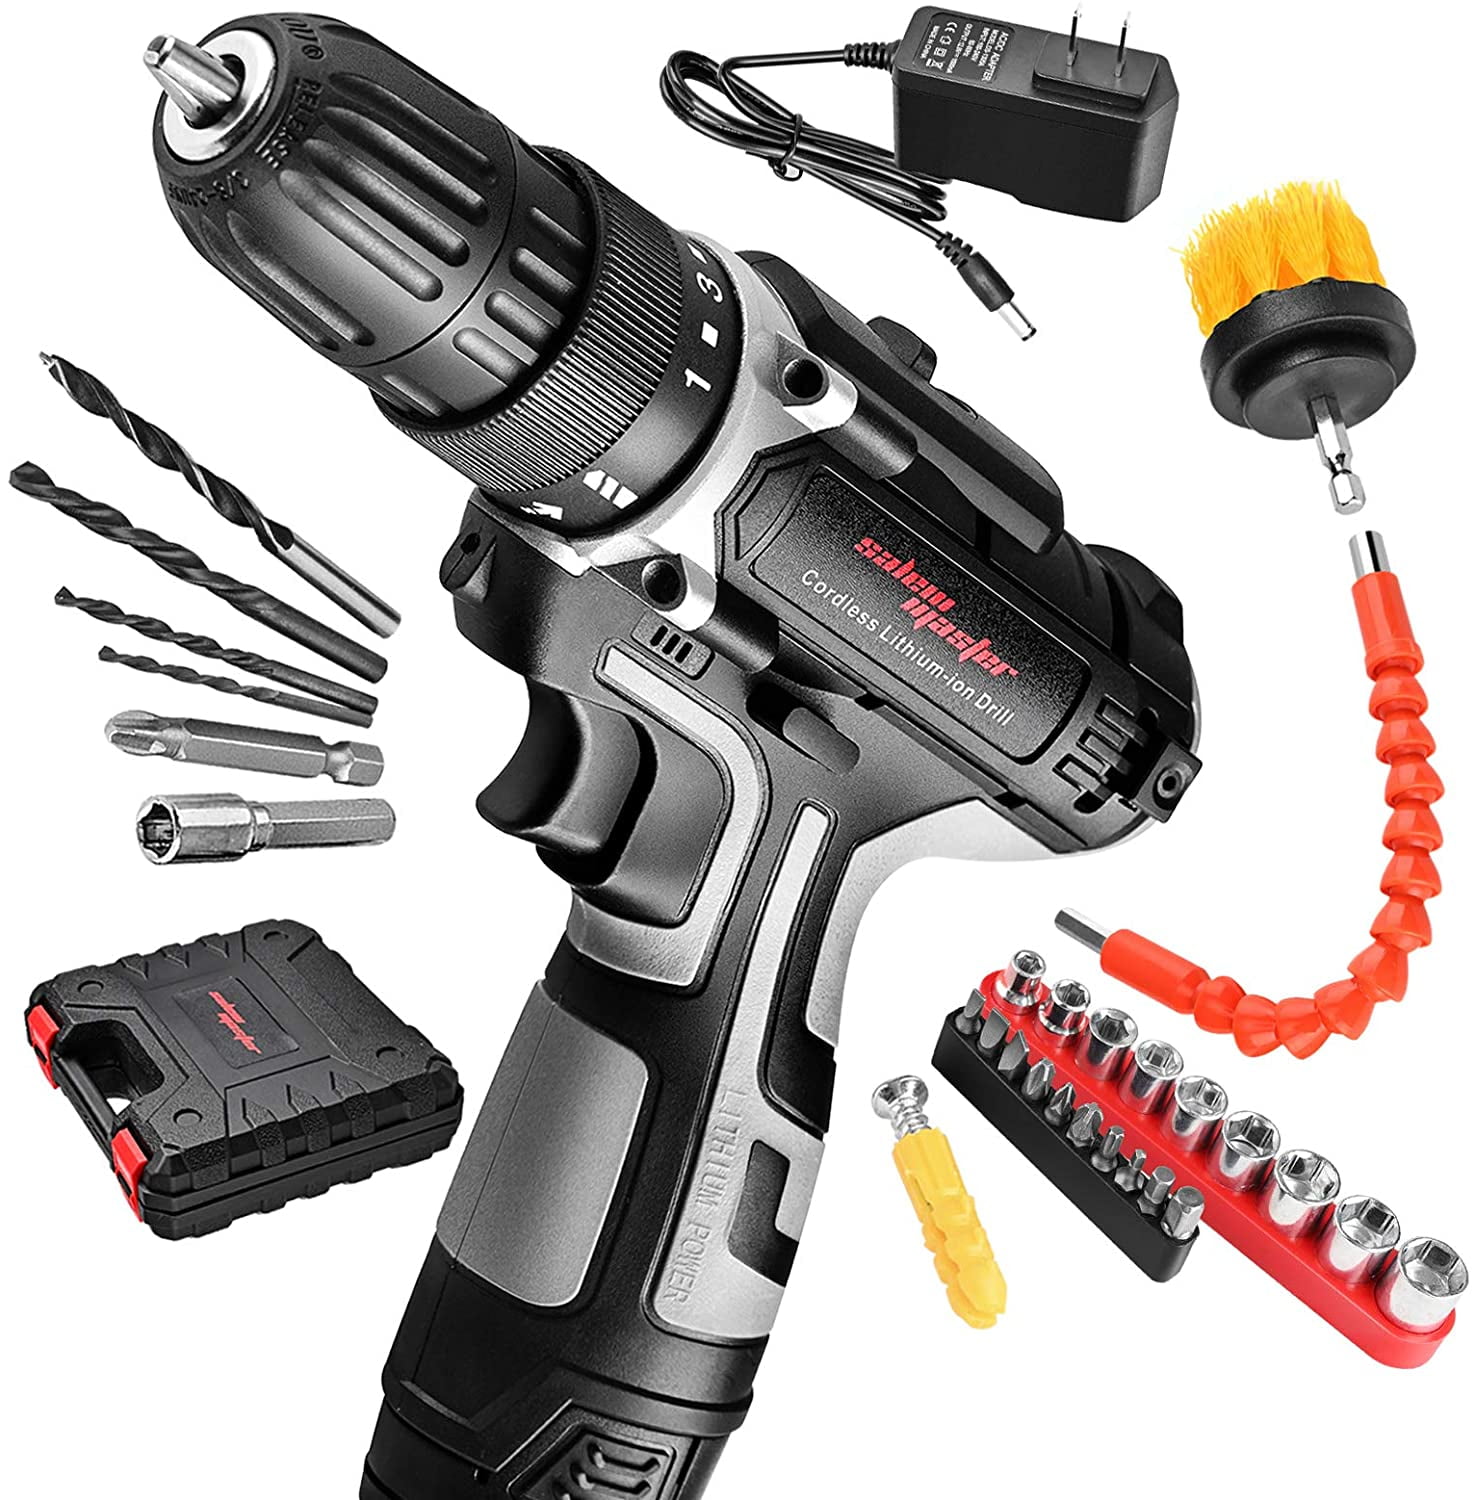 Stalwart 18-Volt Ni-Cad Cordless Drill With 89-Piece Drill Set 